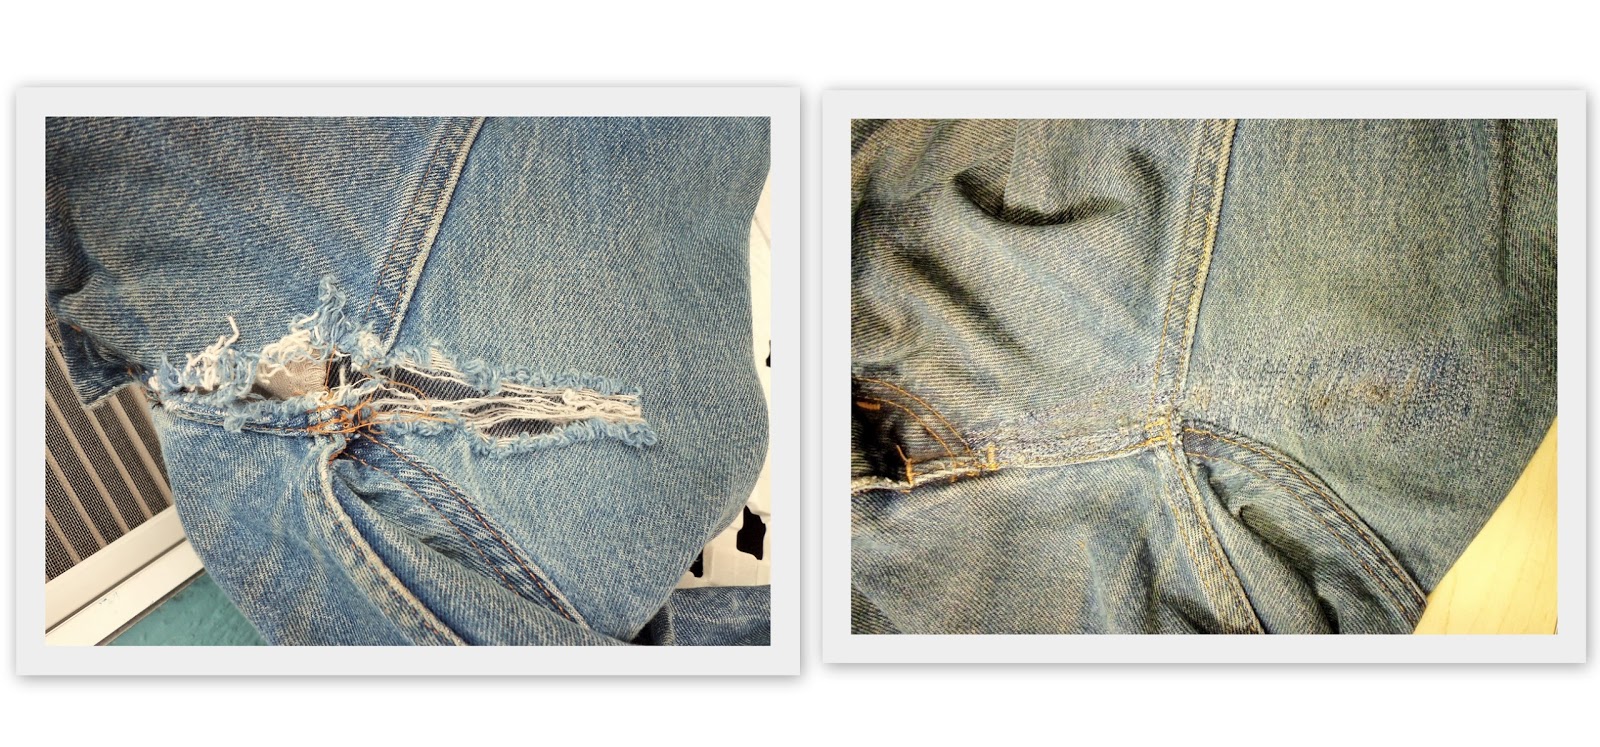 How To Patch A Hole In Blue Jeans